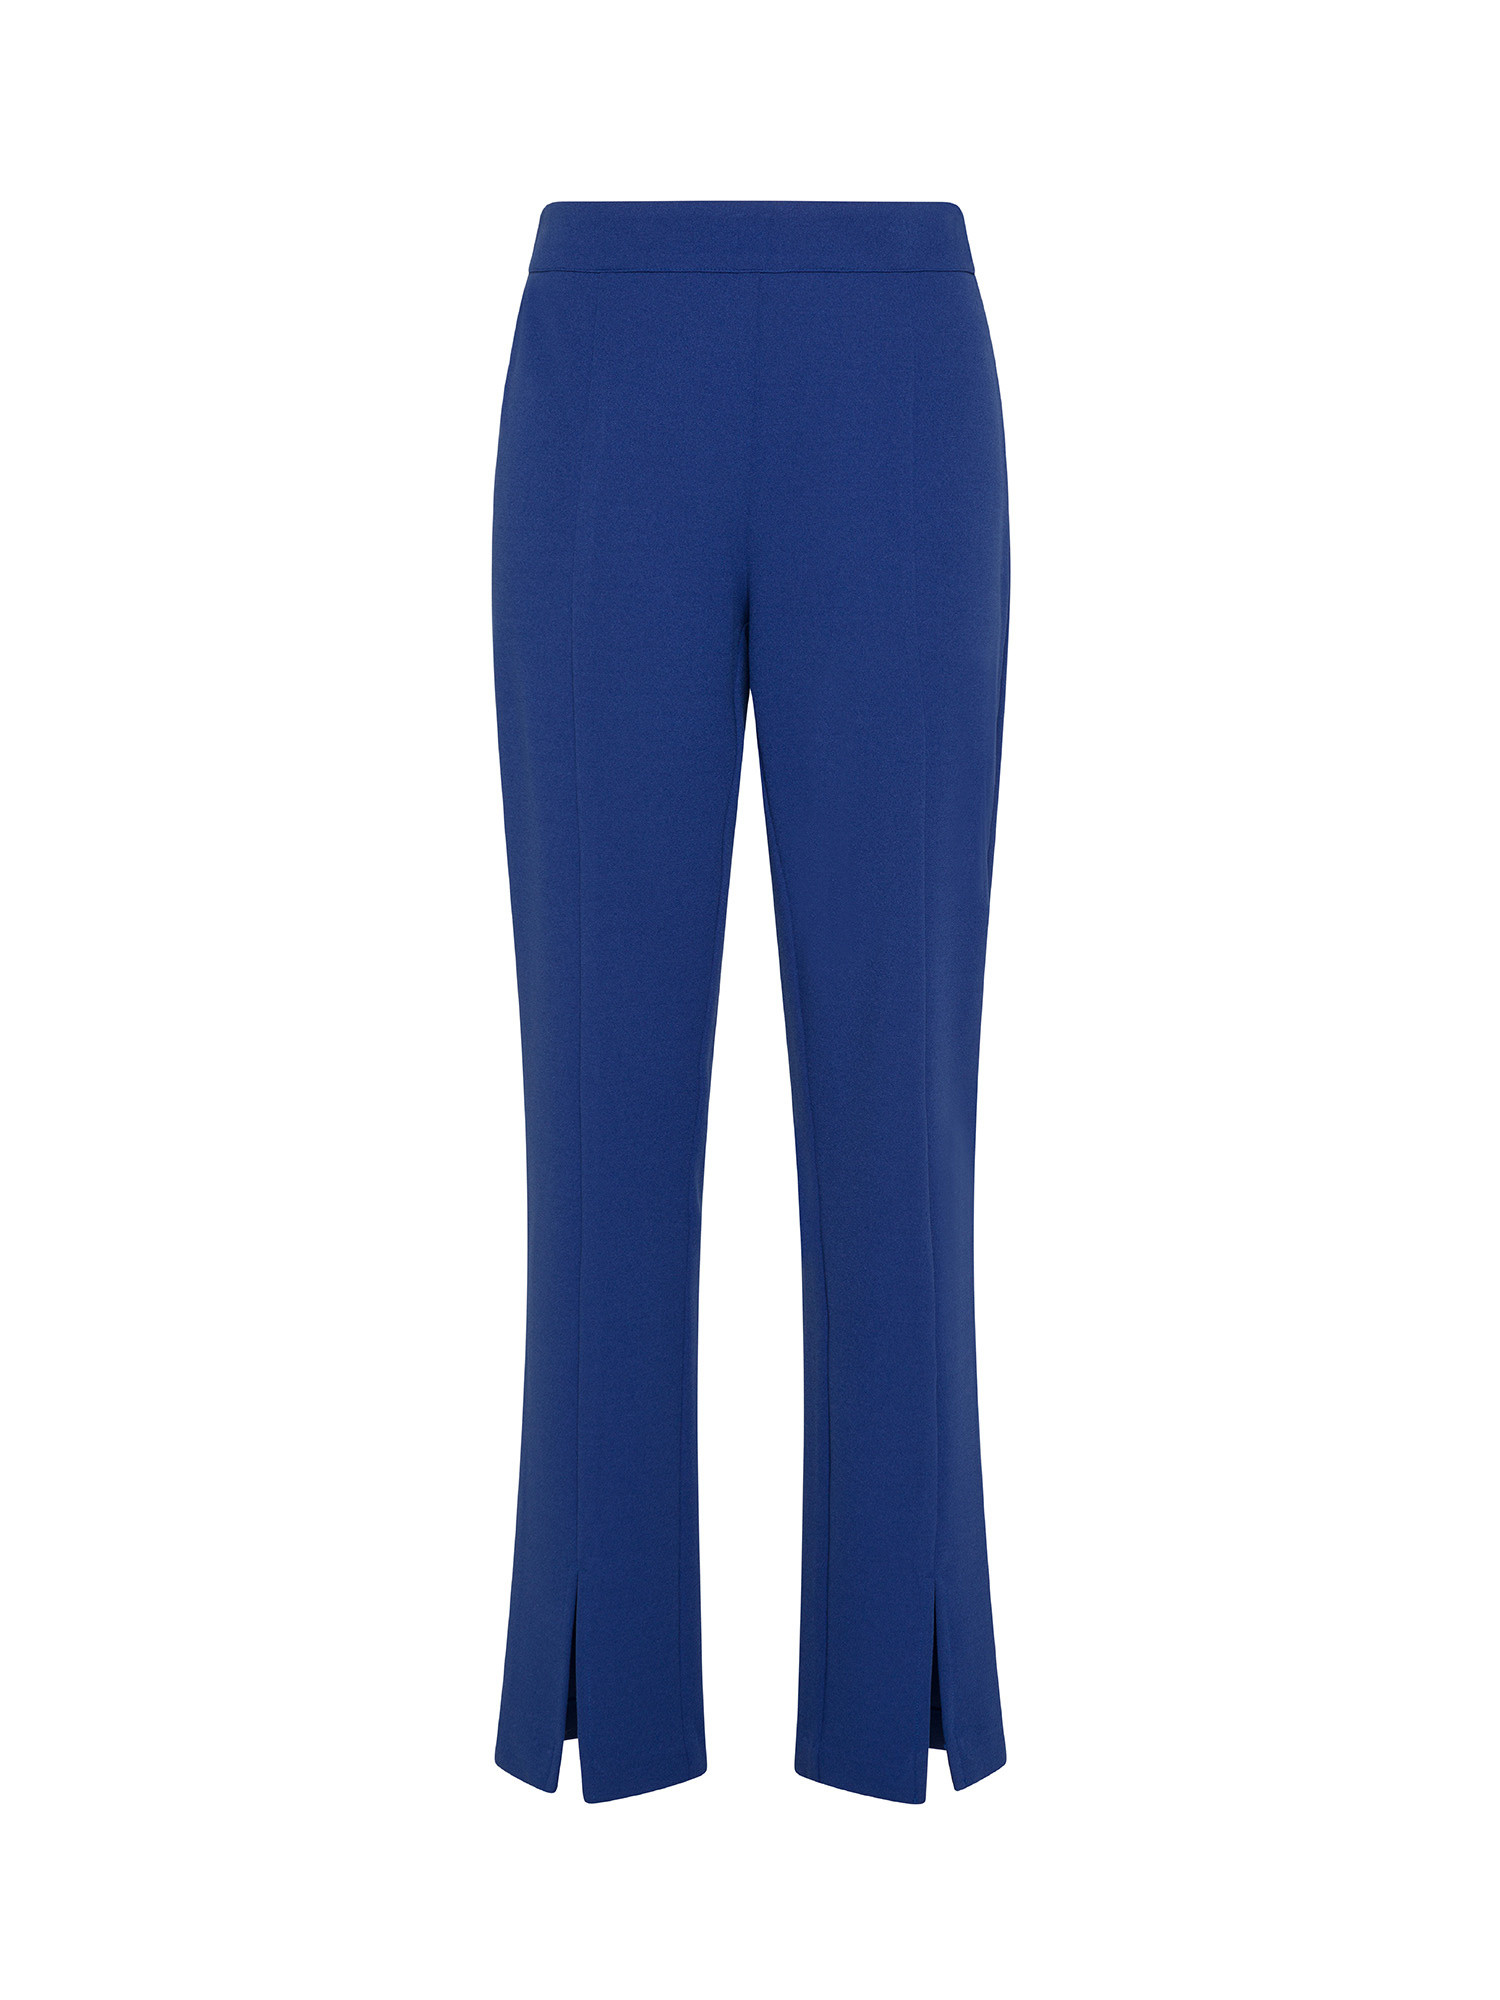 Koan - Crepe trousers with slits, Royal Blue, large image number 0